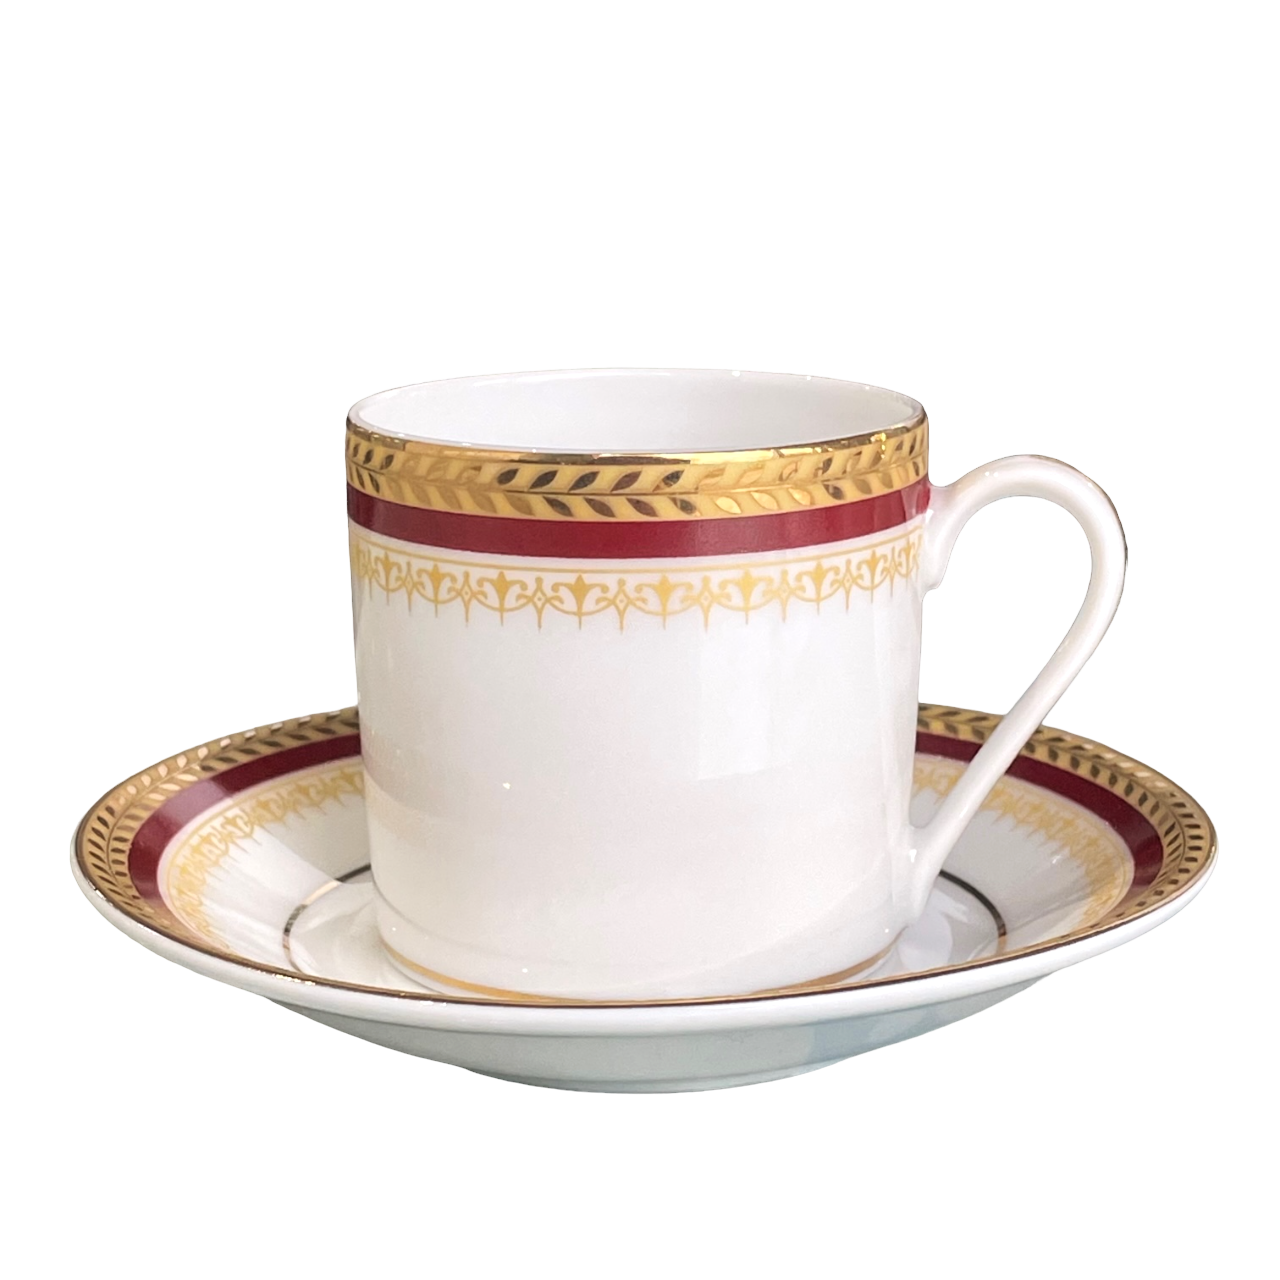 Monaco rouge - Coffee cup and saucer 0.10 litre